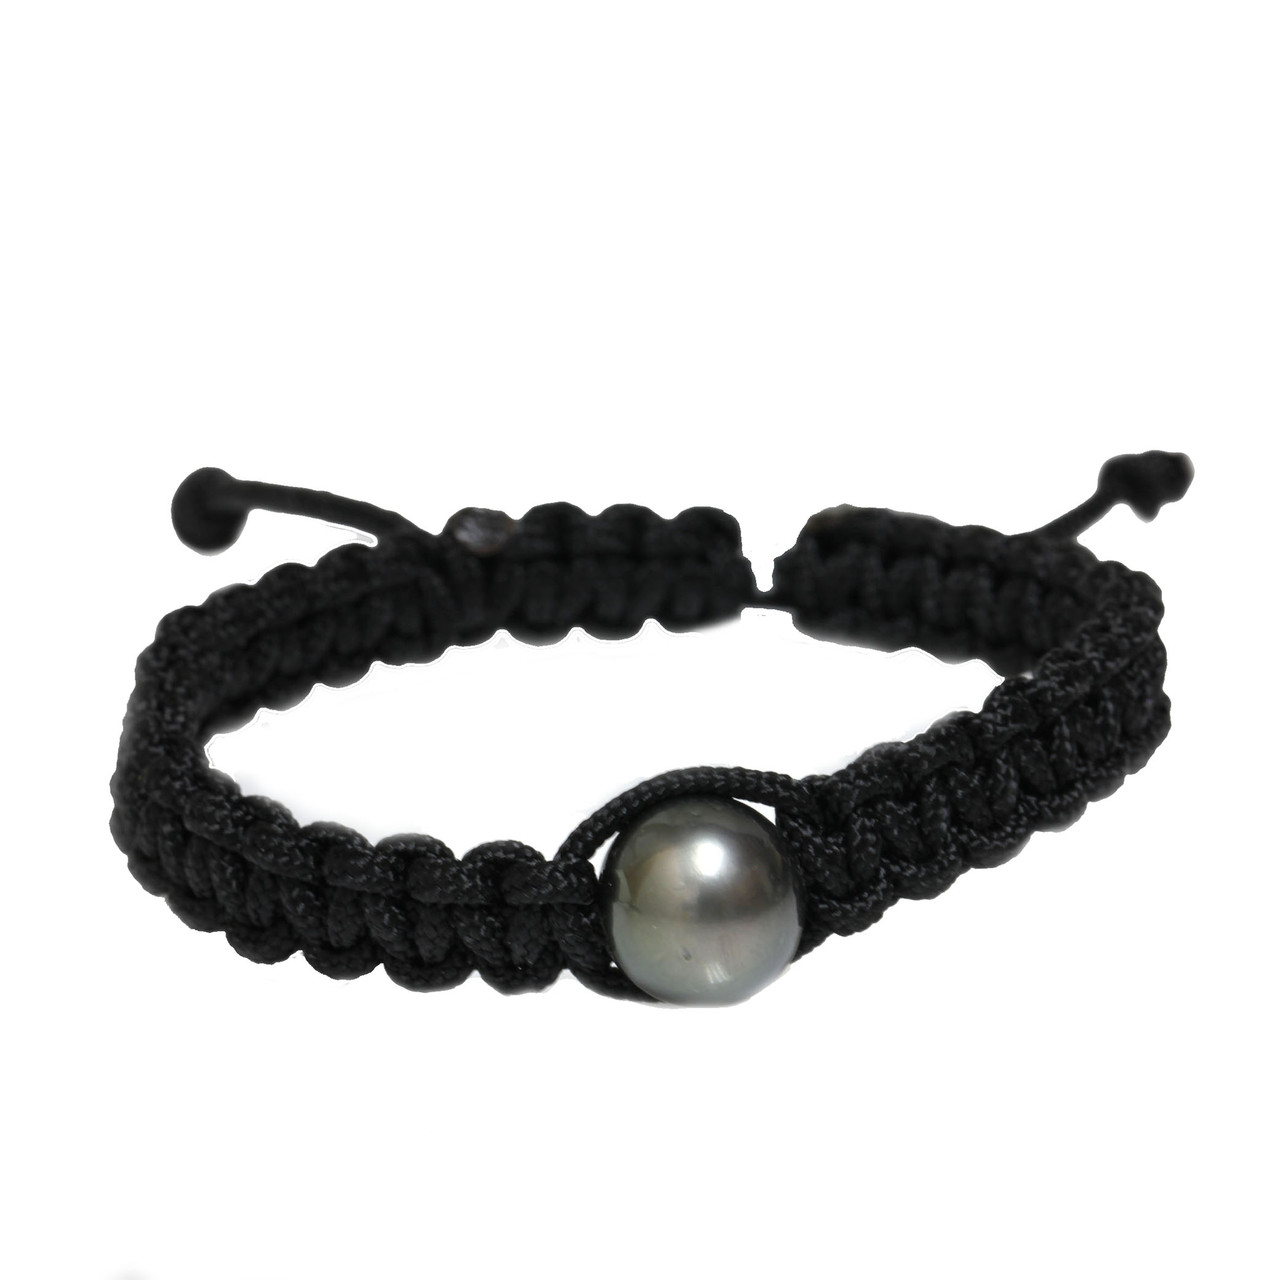 Breathless Wines - Products - Black Piano Wire Bracelet with Pearls